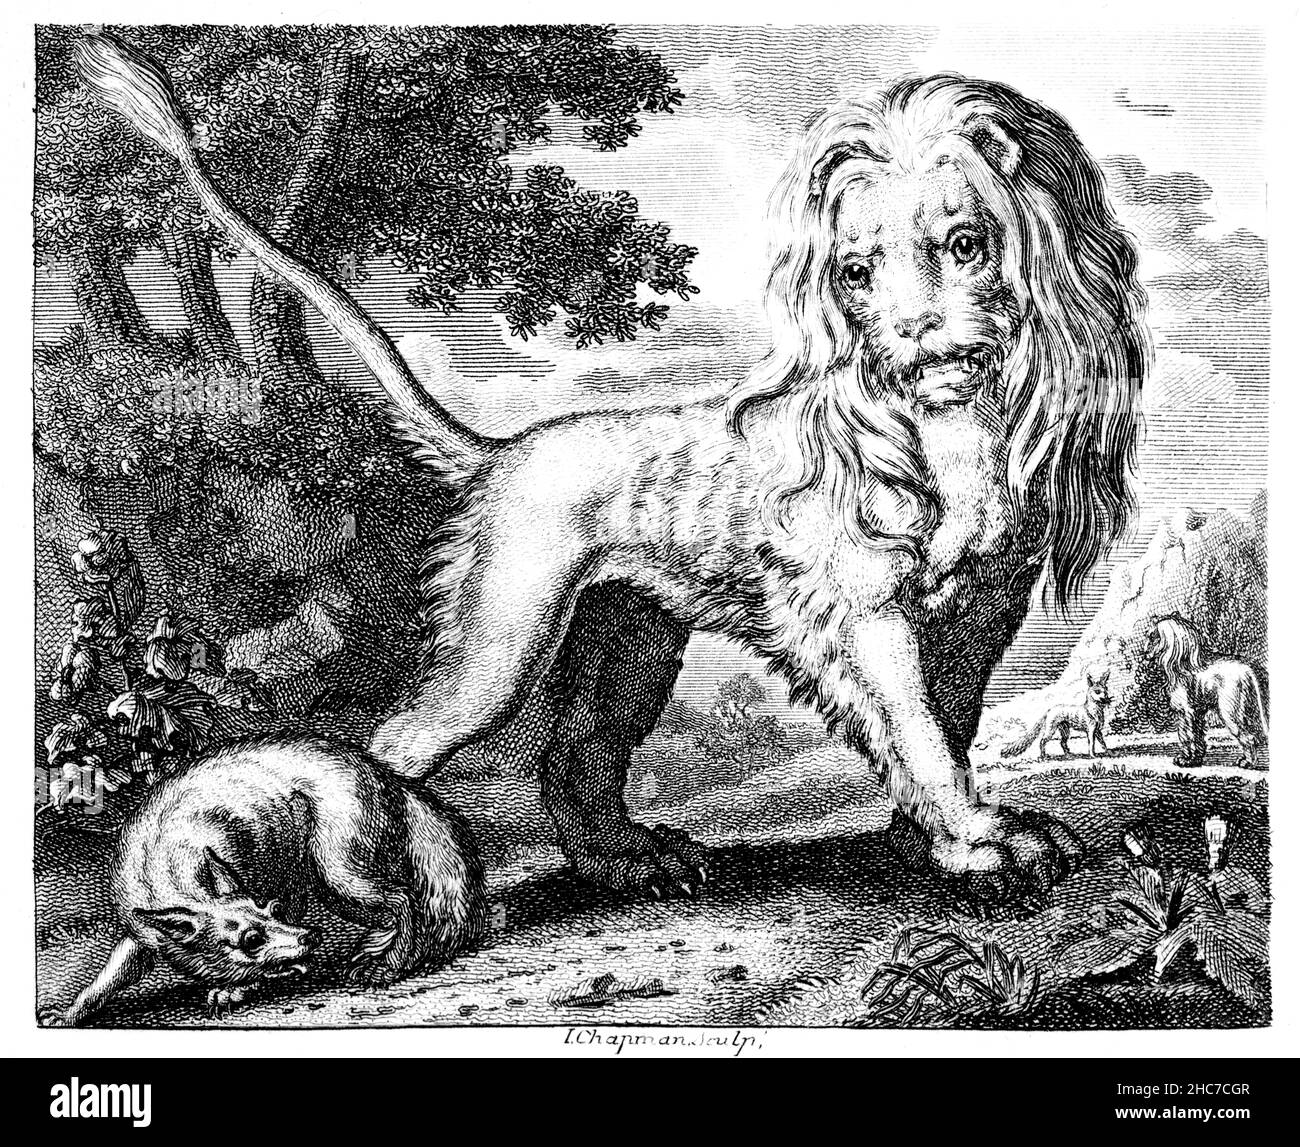 engraved illustration of The Fox and the Lion, a tale of taking care as familiarity breeds contempt, from 1793 First Edition of Stockdale’s Aesop’s Fa Stock Photo